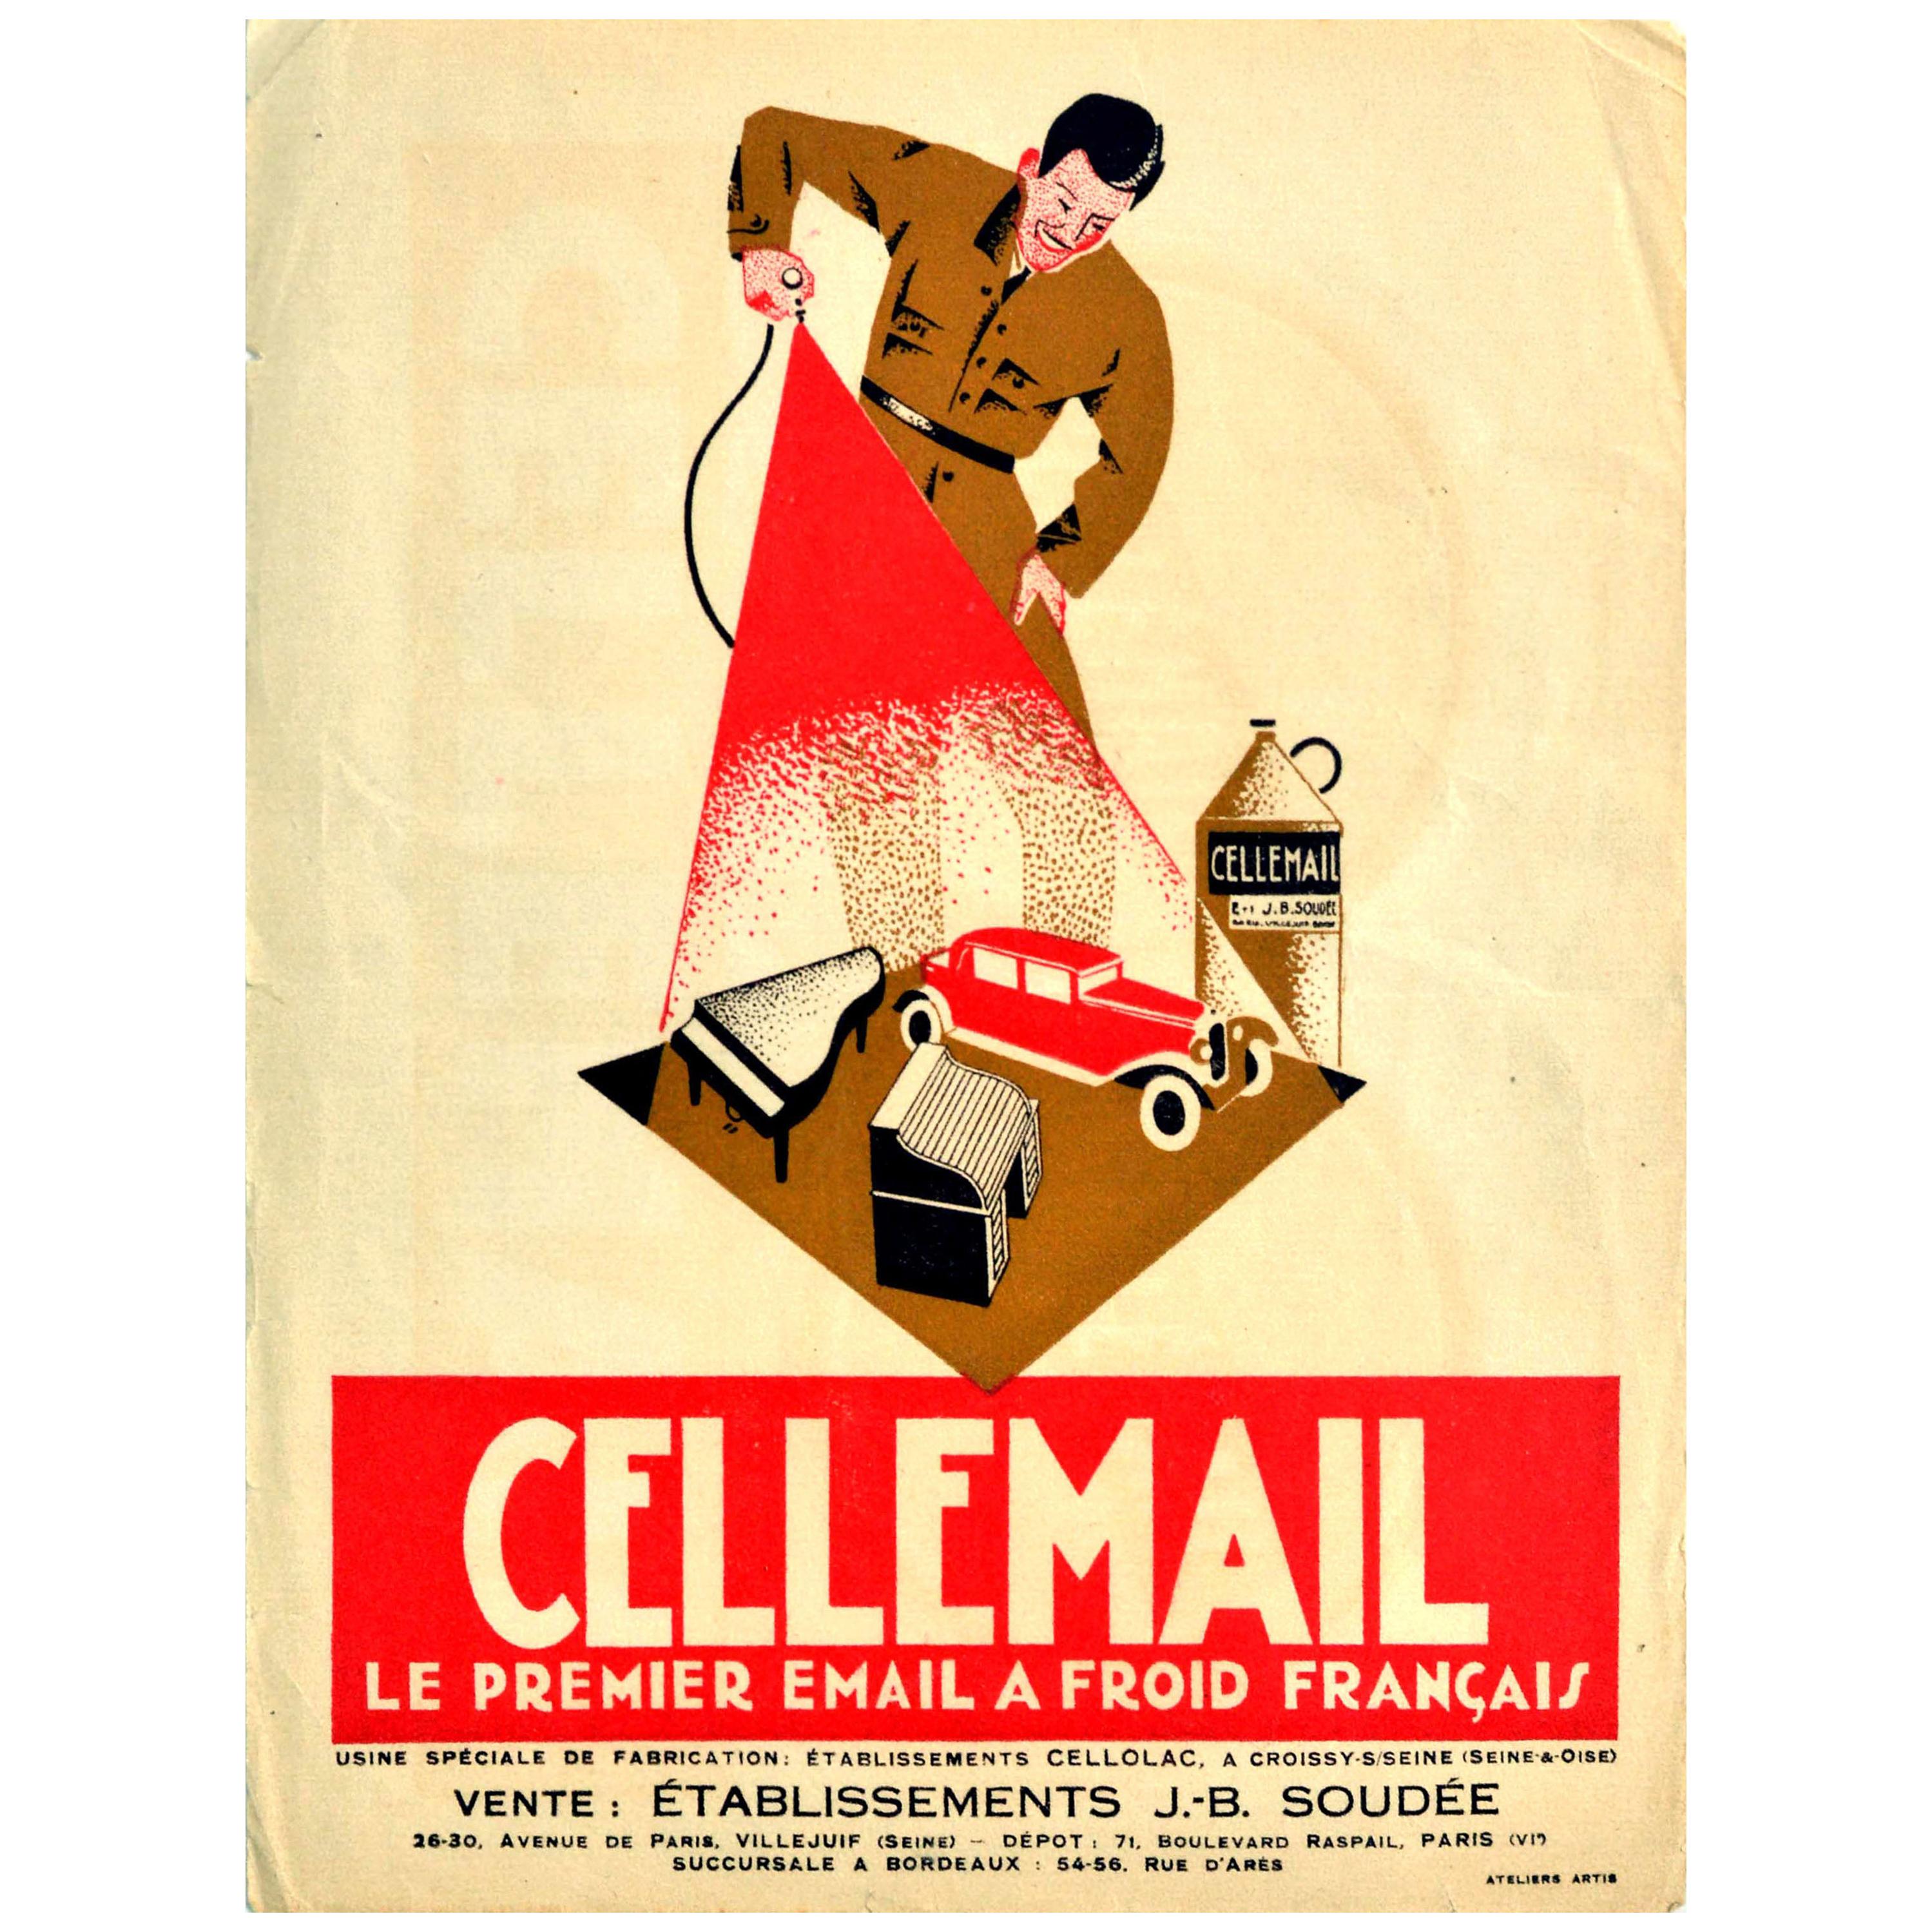 Original Antike Poster Cellemail Le Premier Email A Froid Francais Emaille-Farbe